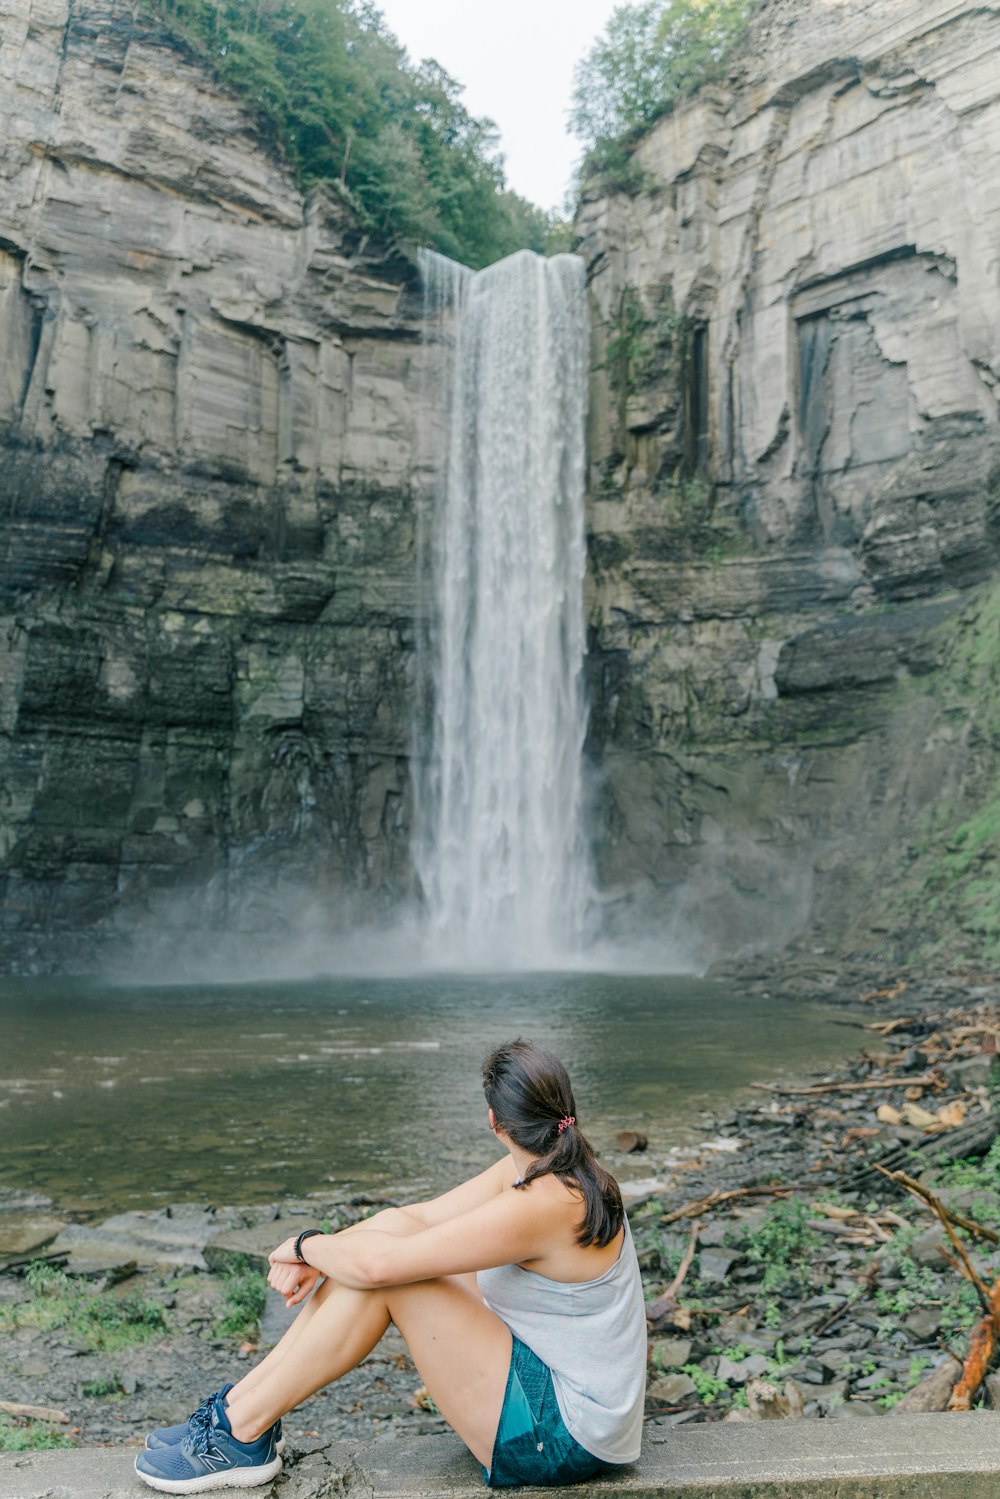 a woman sitting on a ledge in front of a waterfall